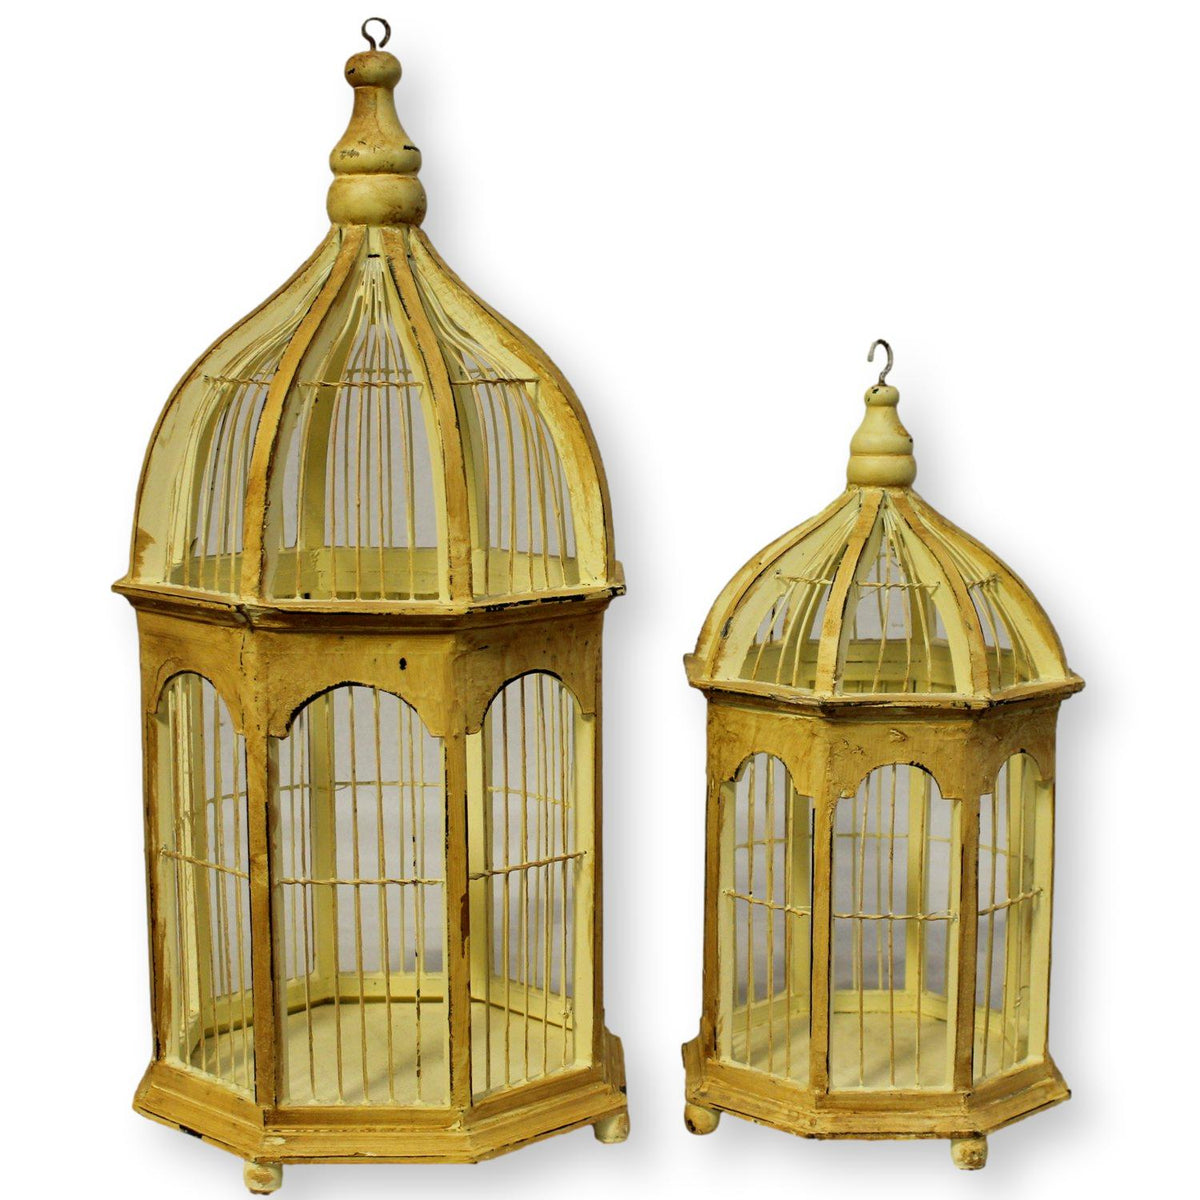 Pair of Rustic Yellow Bird Cages